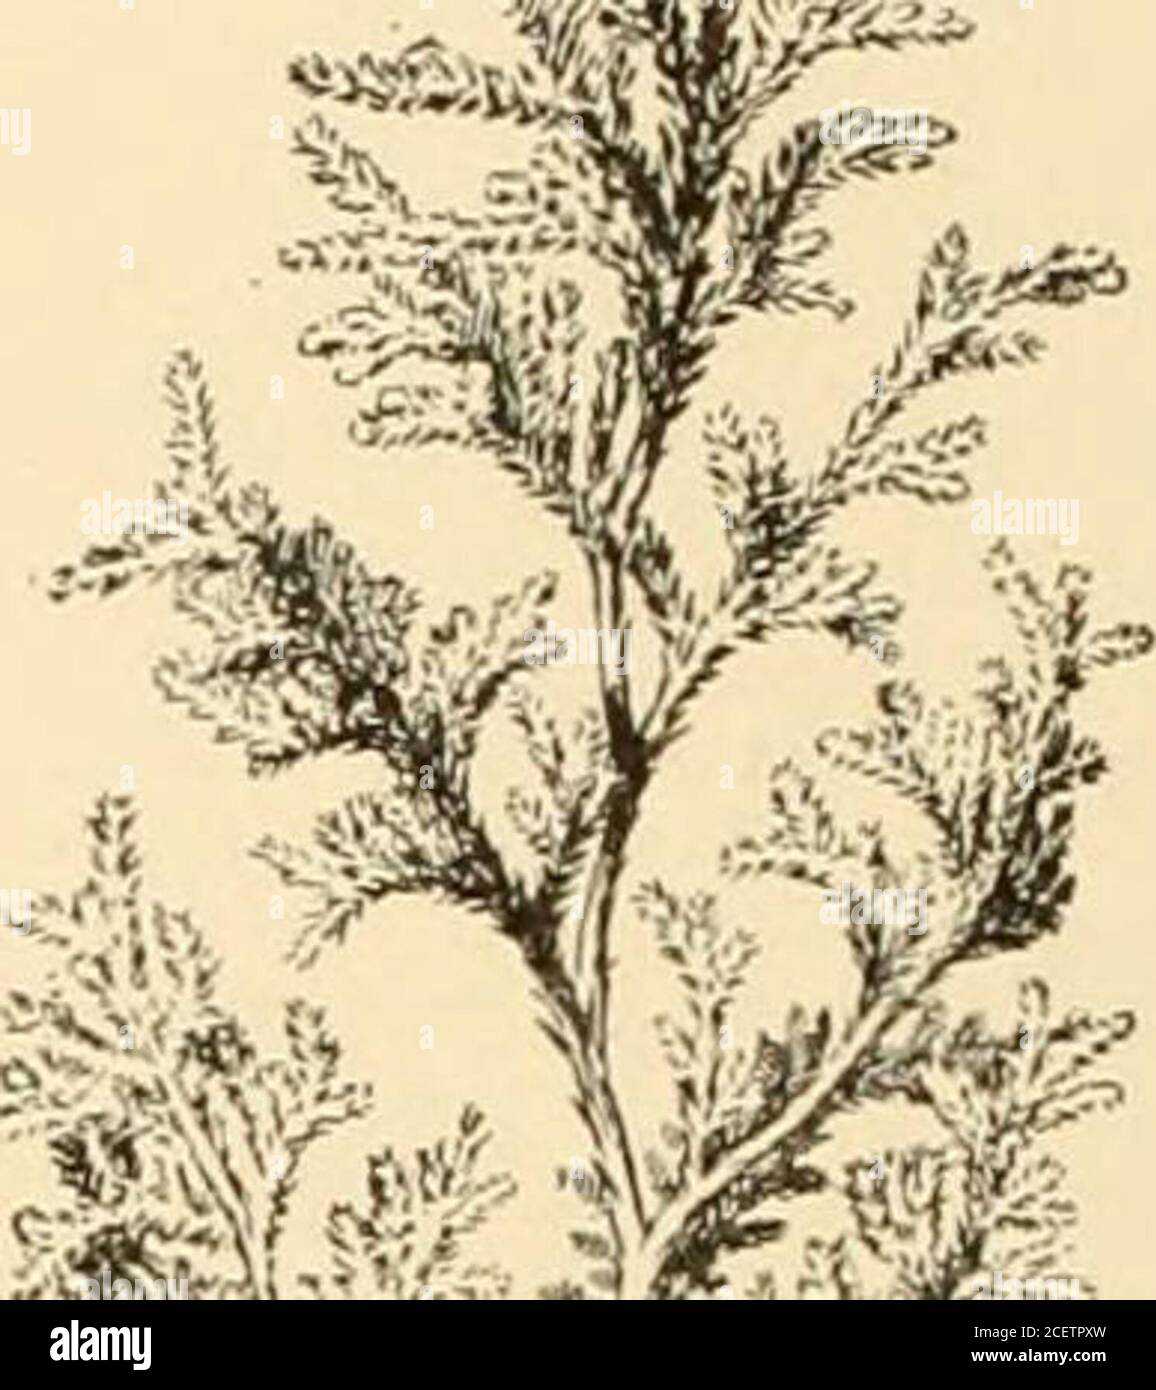 . Cyclopedia of American horticulture : comprising suggestions for cultivation of horticultural plants, descriptions of the species of fruits, vegetables, flowers, and ornamental plants sold in the United States and Canada, together with geographical and biographical sketches. 417. Chamaecyparis pisifera. heat can be given, it will hasten the development of rootsconsiderably. All the so-called Retinosporas and thedwarfer forms, and most of the varieties of C. Lawsoni- CHAM^CYPABIS (tna, are readily increased in this way, while the typicalforms of U. Nutkaensis, ohtusa and sphmroidea do notgrow Stock Photo